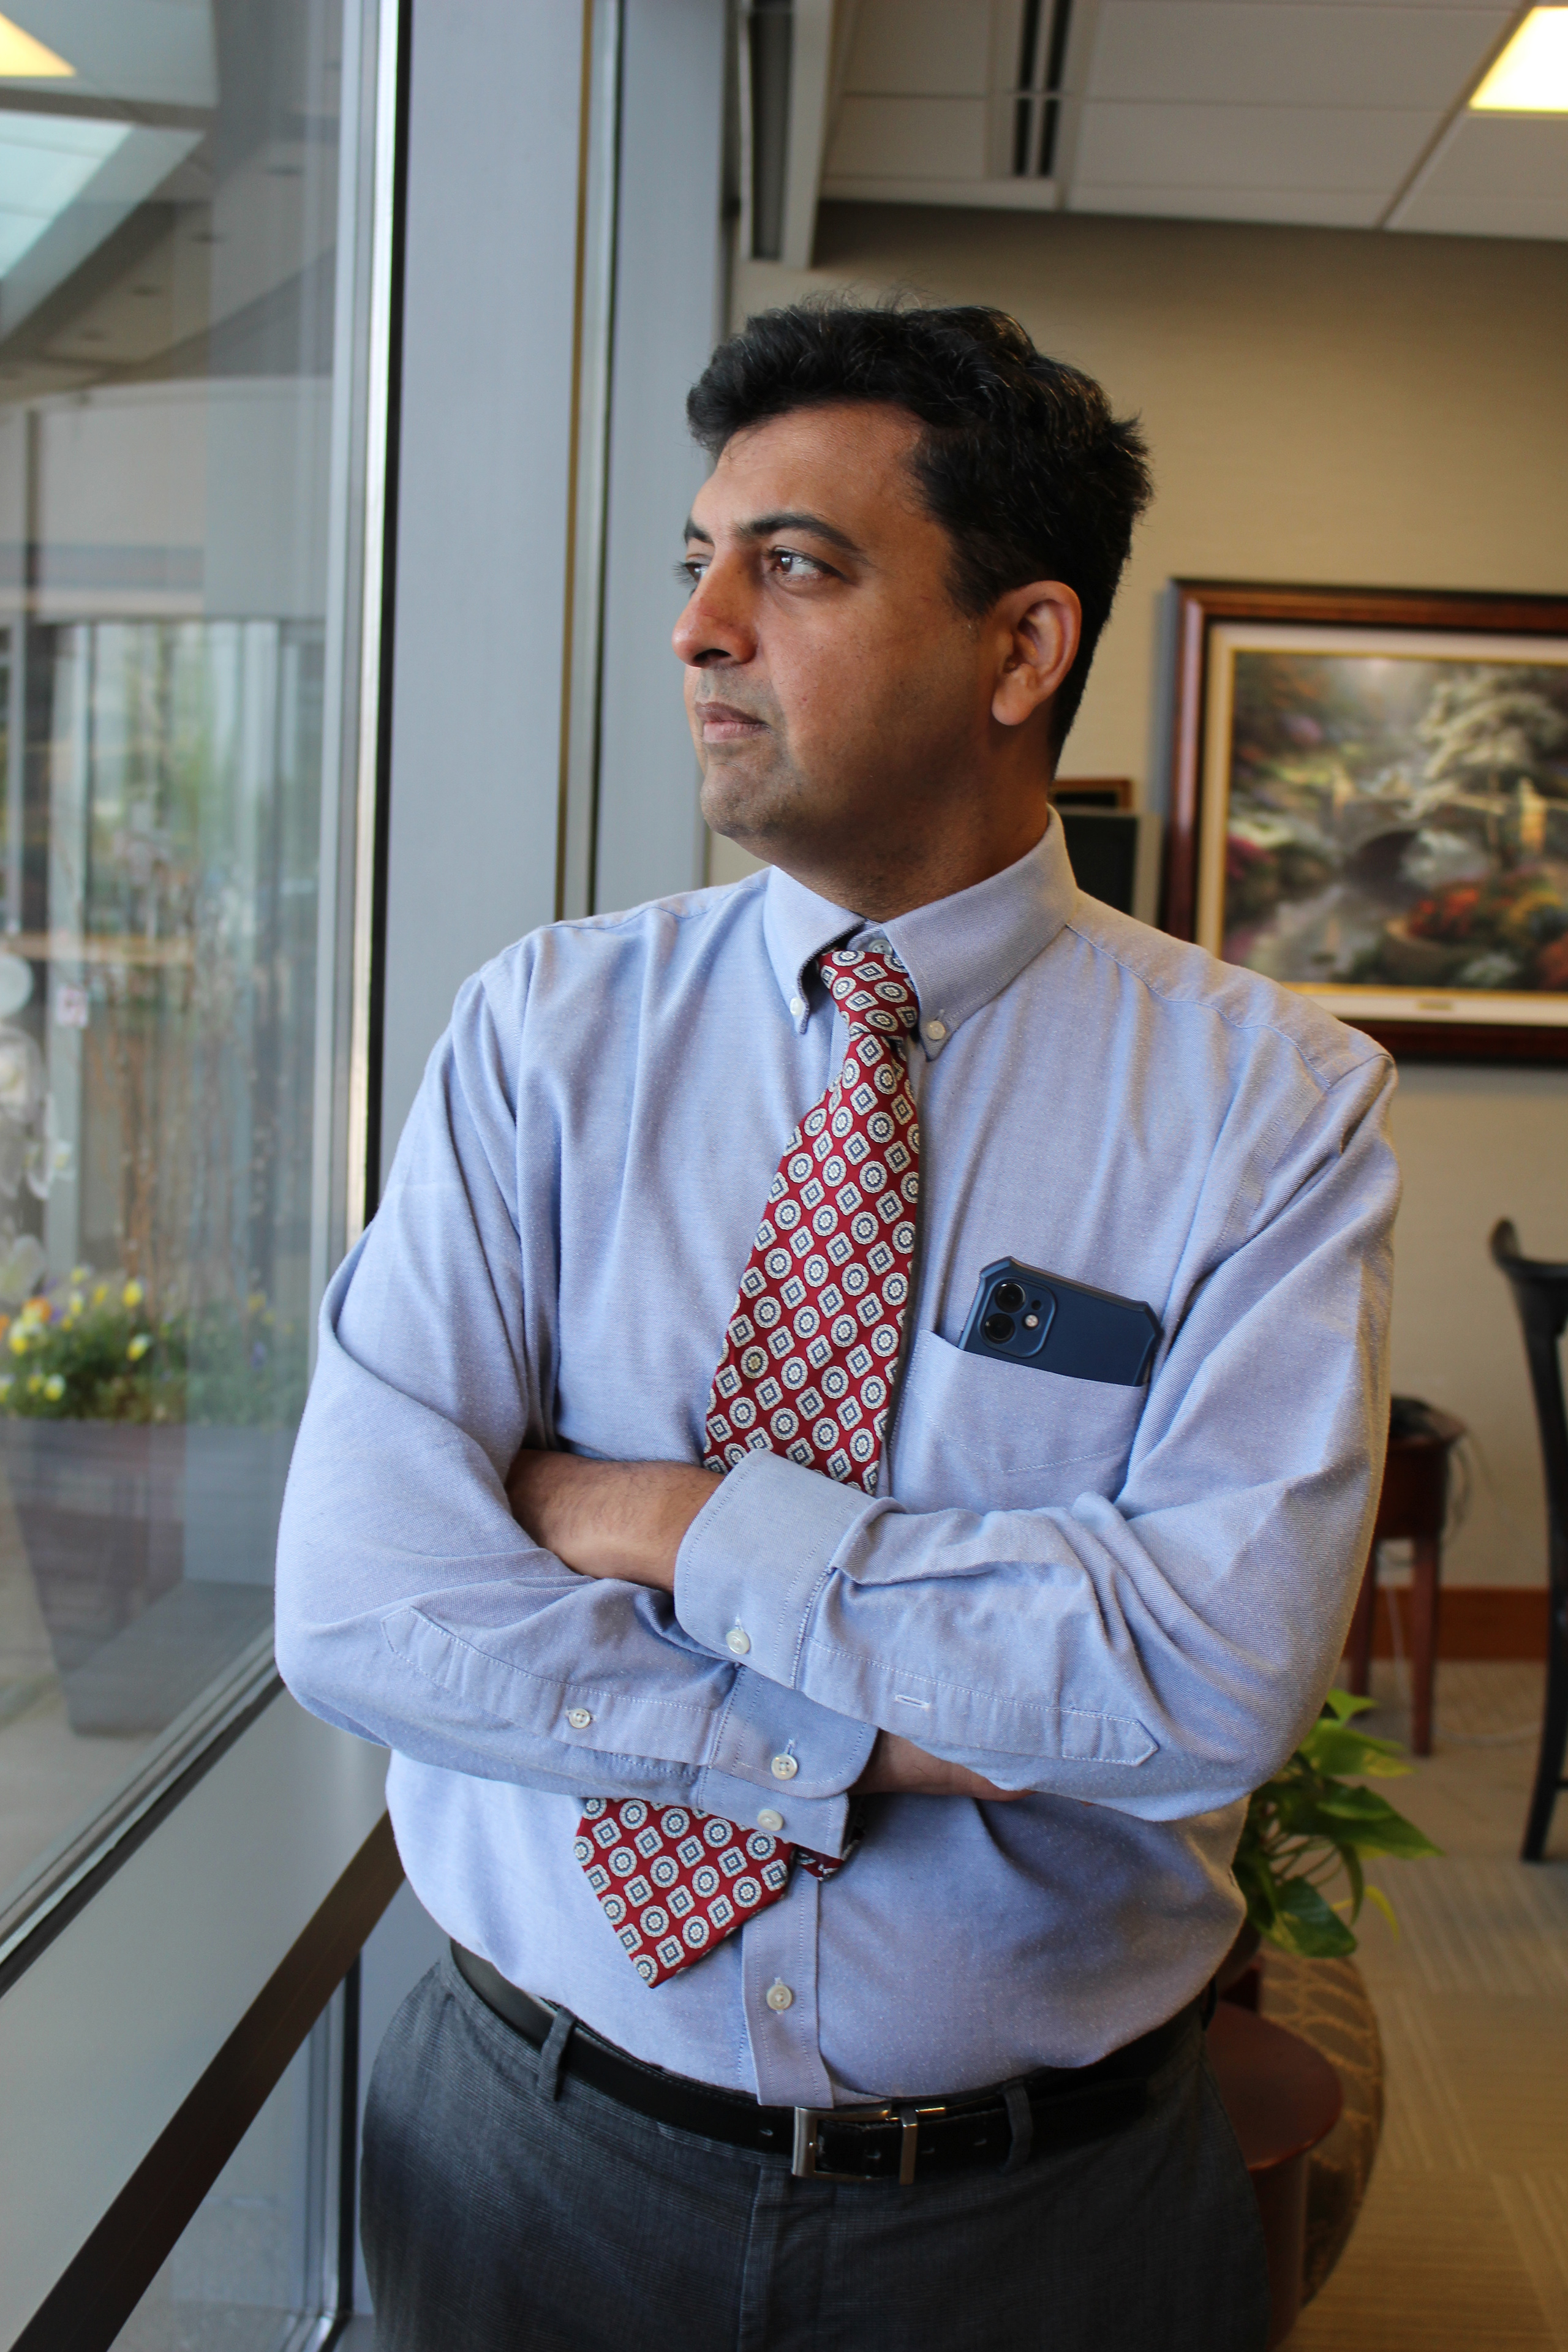 Dr. Bhavin Shah stands beside a window and is looking out with his arms crossed in front of his chest. He appears contemplative and wears a dress shirt and tie.